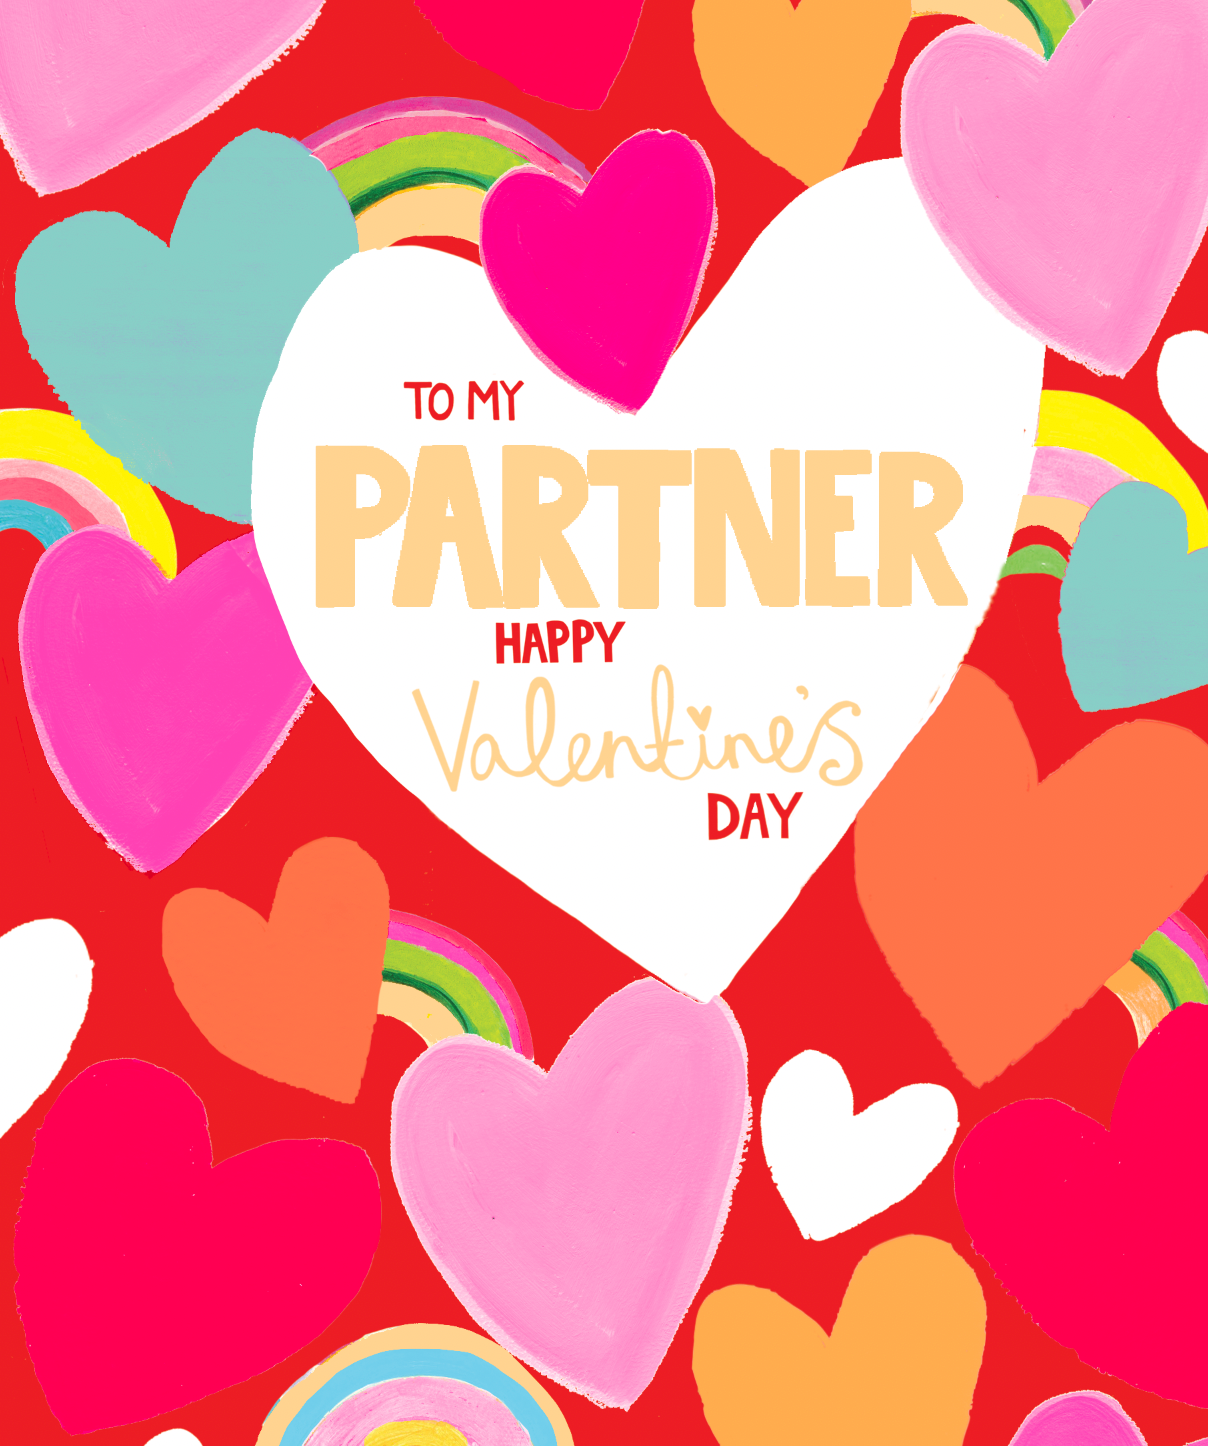 To My Partner Playful Hearts Valentines Day Card by penny black